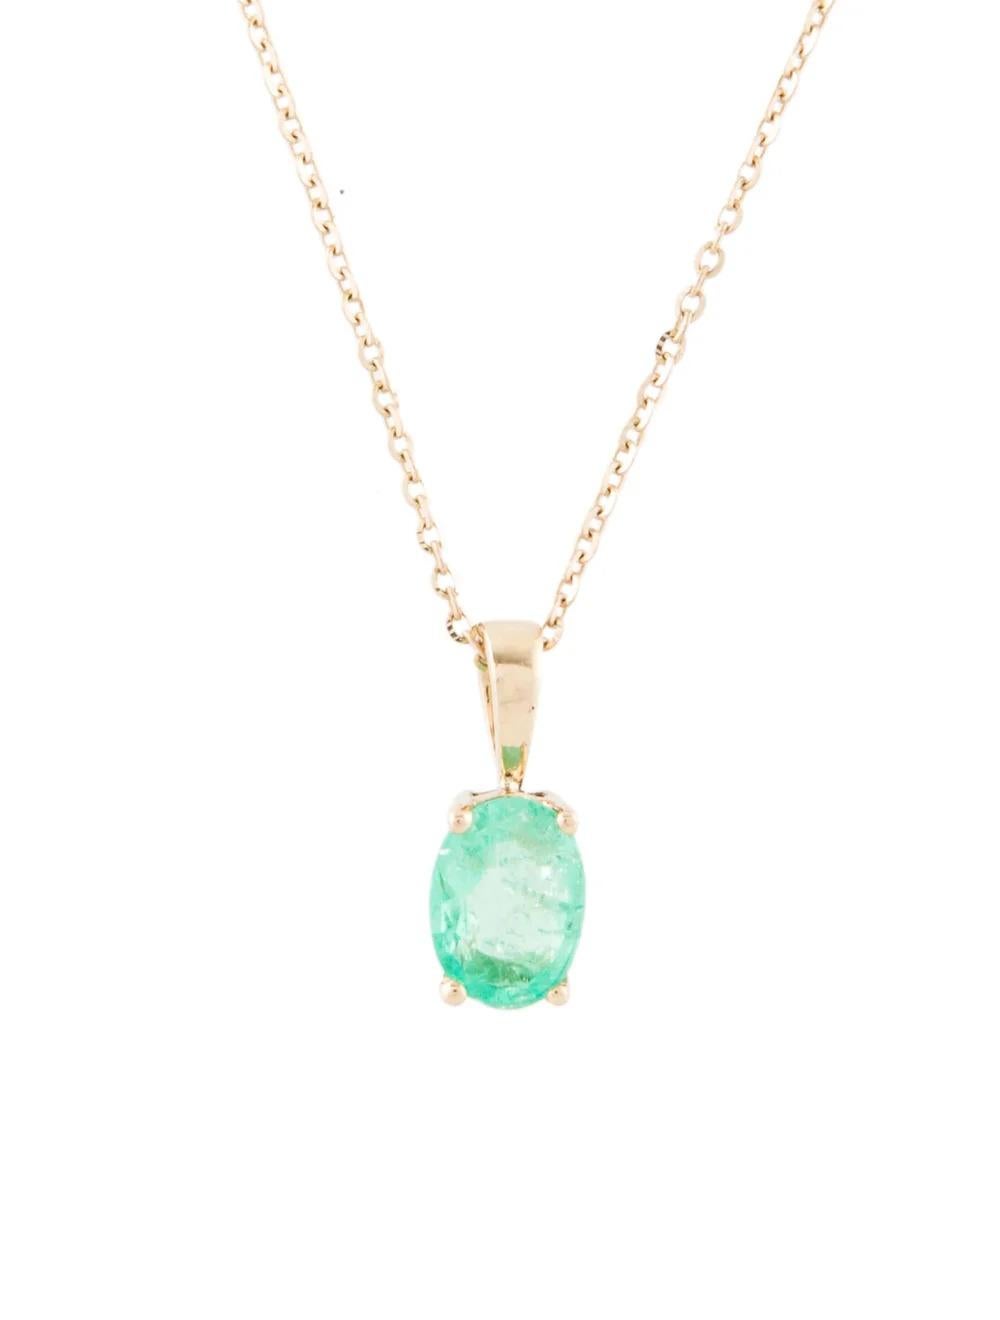 This captivating 14K Yellow Gold necklace is a stunning showcase of elegance and sophistication, featuring a remarkable 0.67 Carat Oval Modified Brilliant Emerald. Crafted with meticulous attention to detail, this exquisite piece exudes timeless